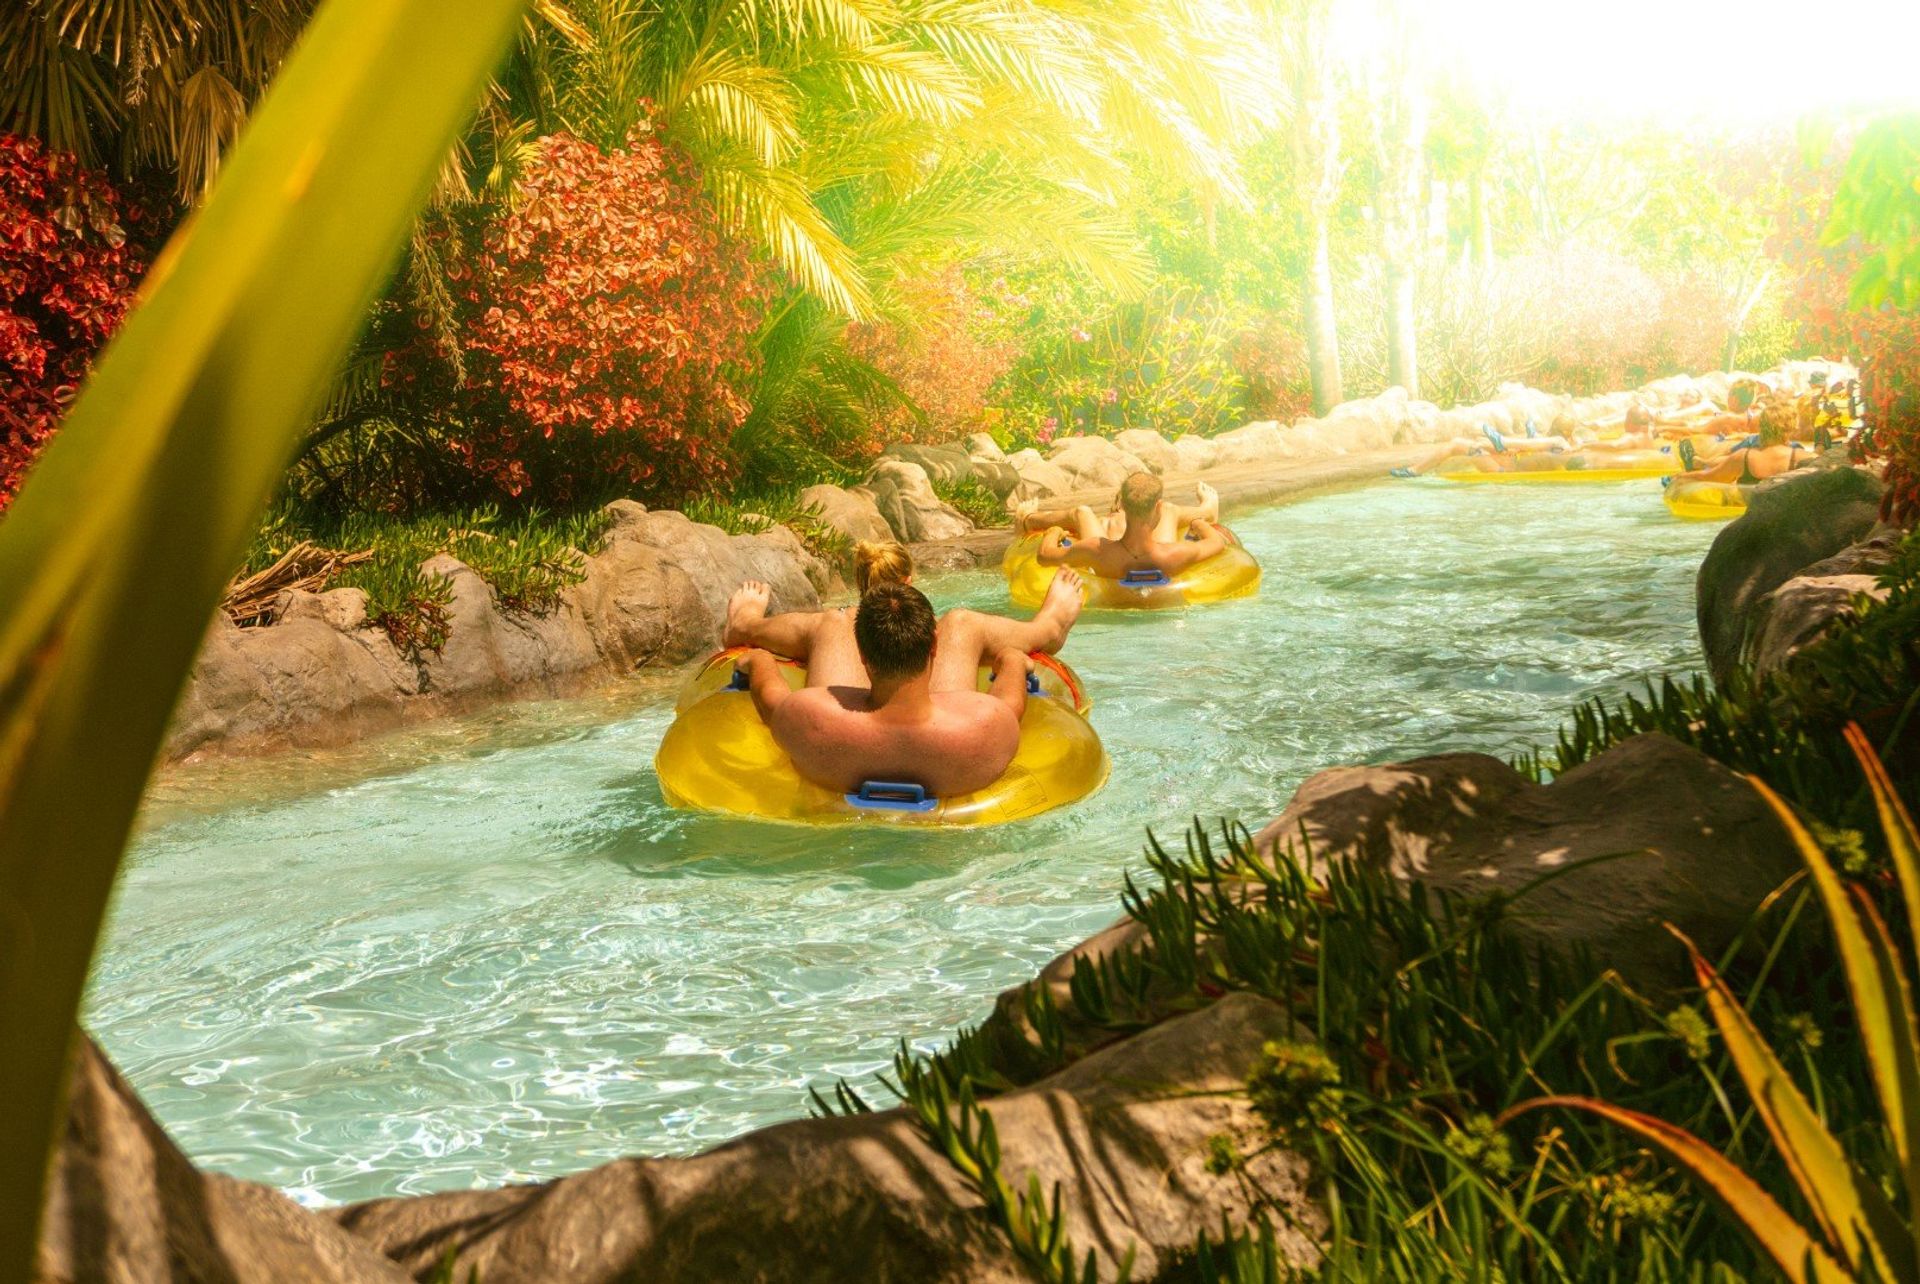 Whoever says kids and parents can't have fun together, Siam Park will prove them wrong!